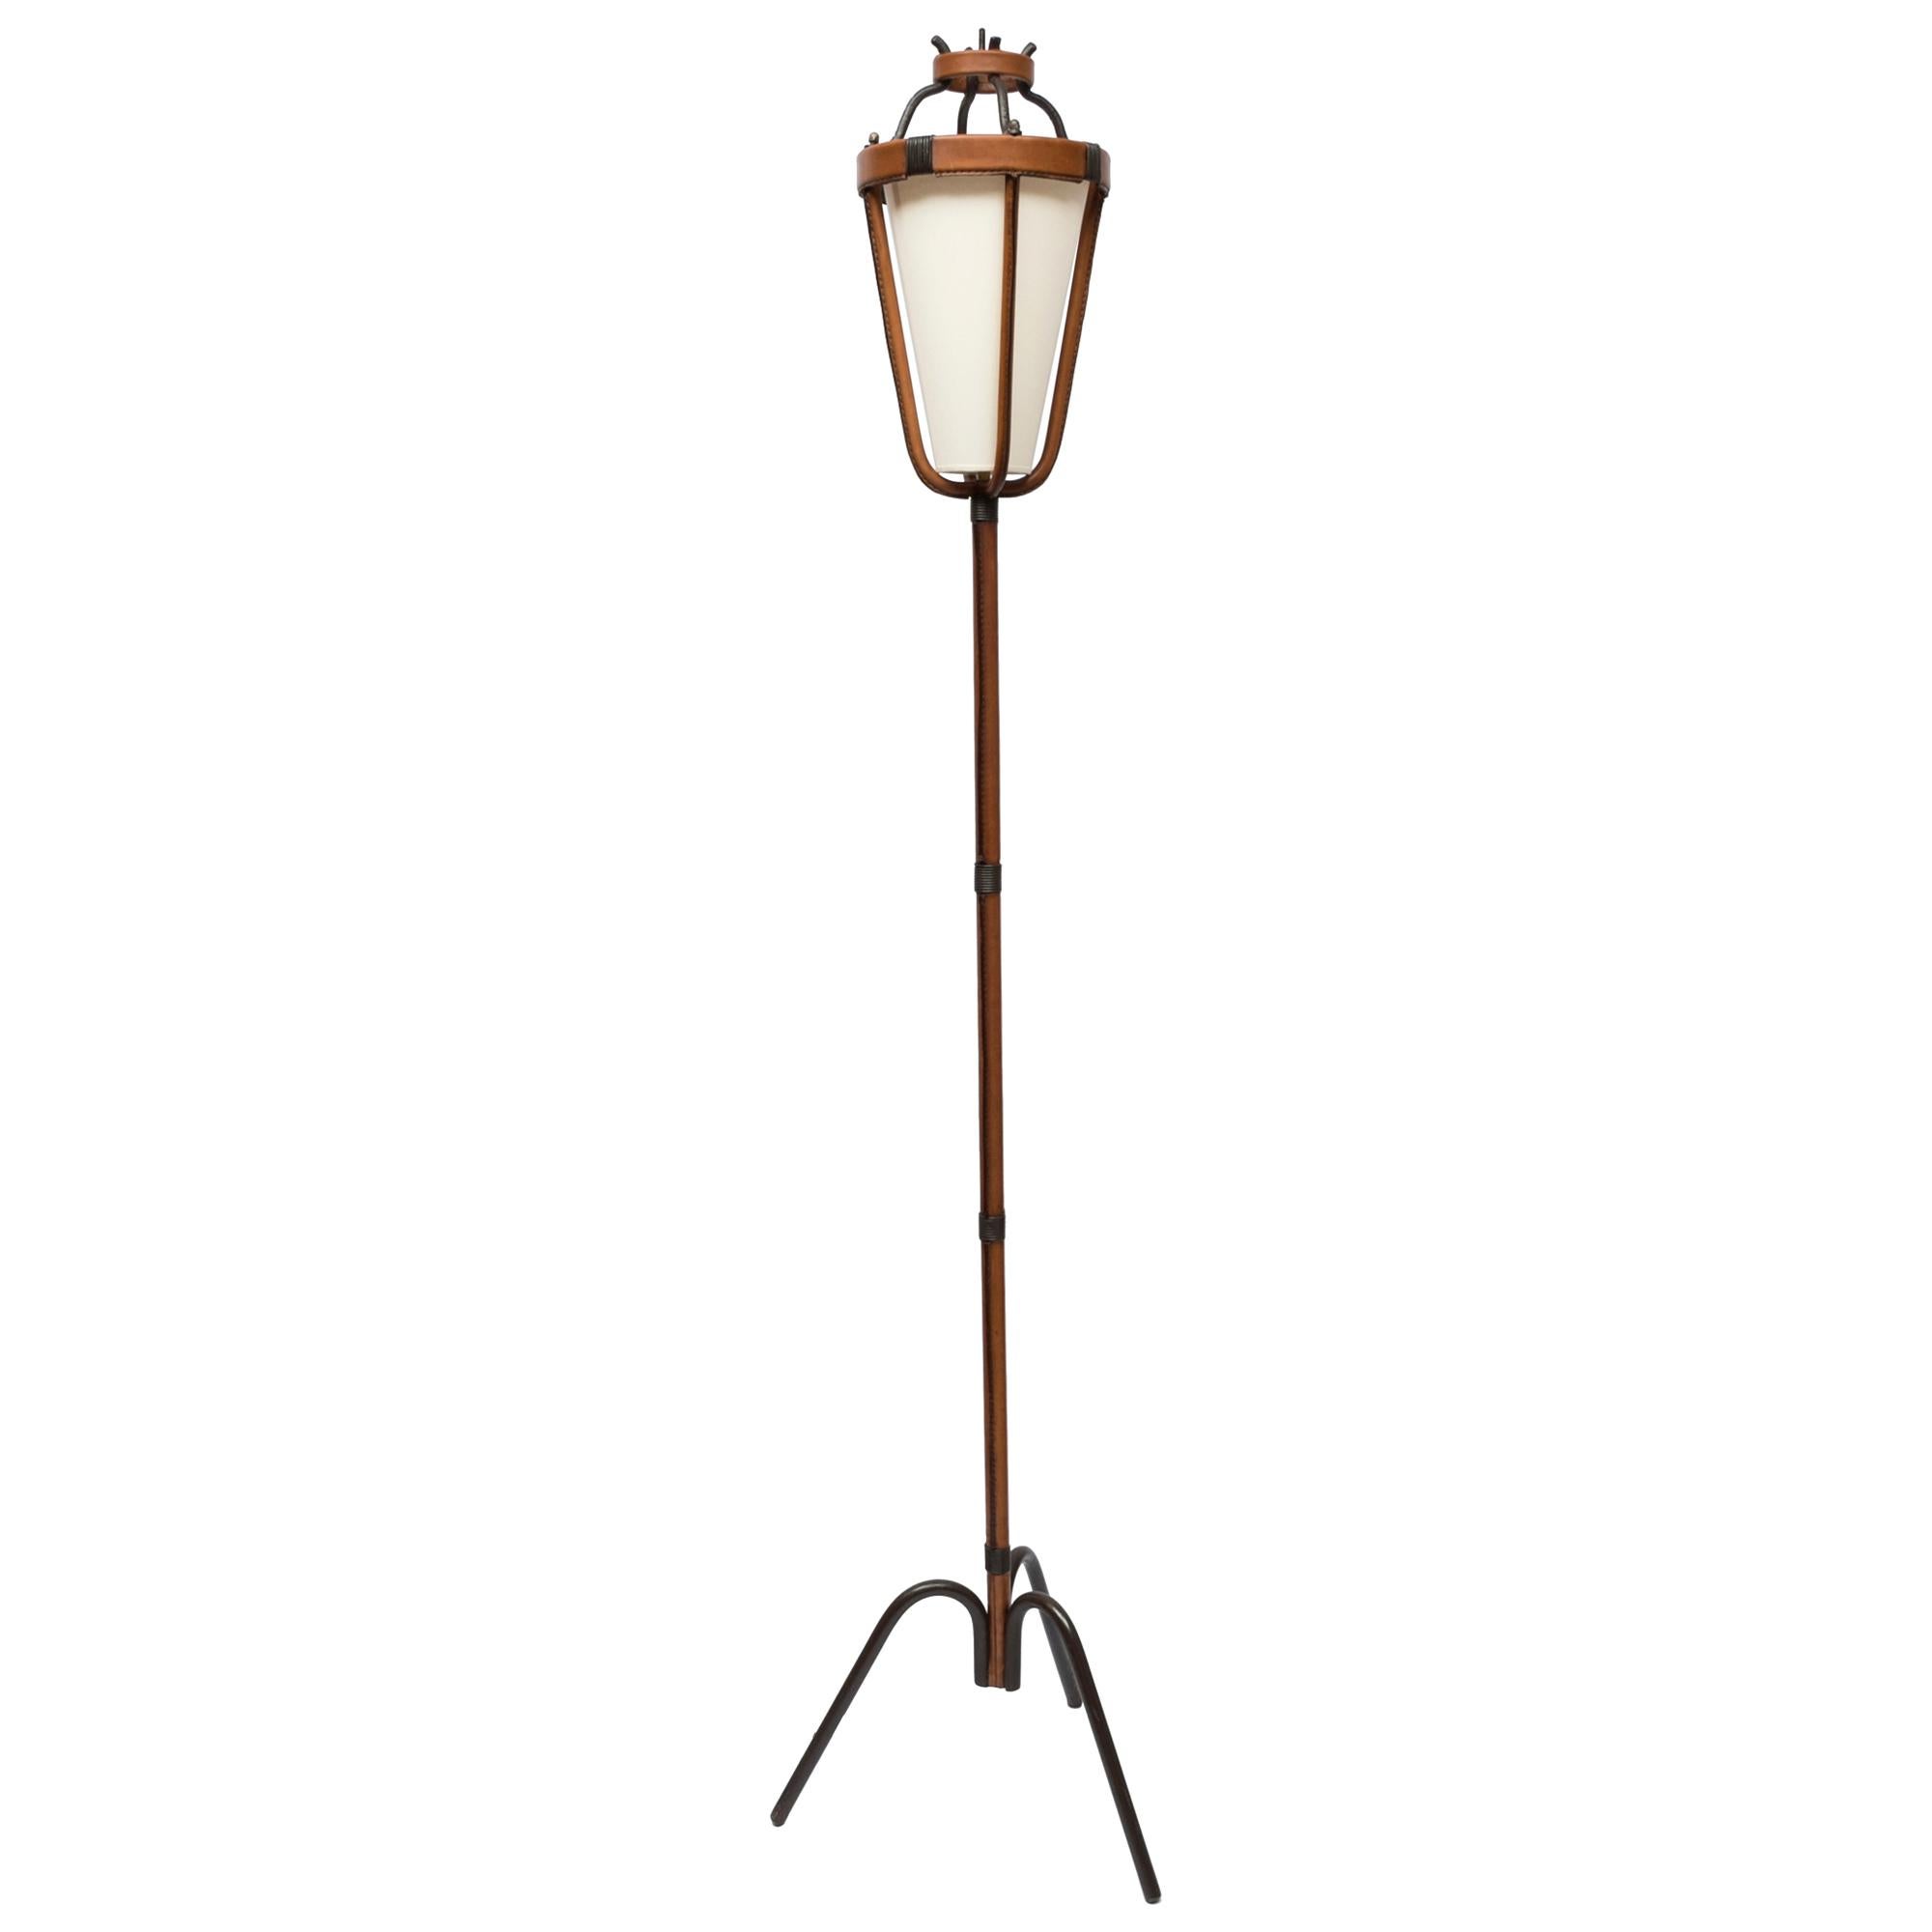 1950s stitched leather floor lamp by Jacques Adnet,
France.